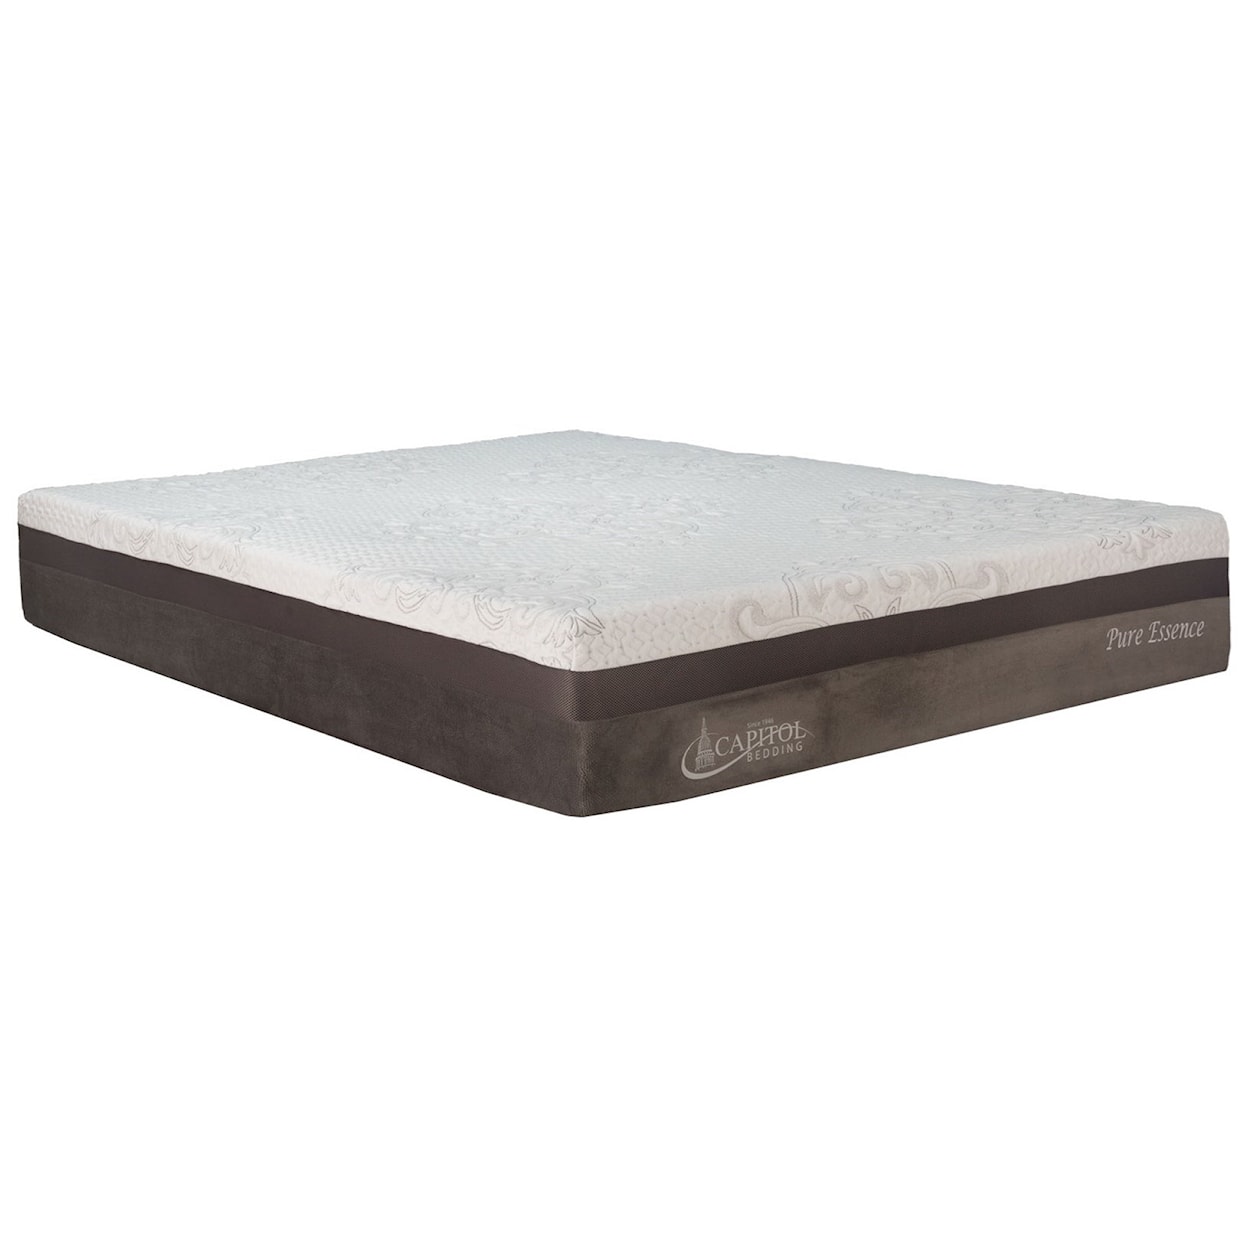 Capitol Bedding Pure Essence II Firm Twin 11" Gently Firm Mattress